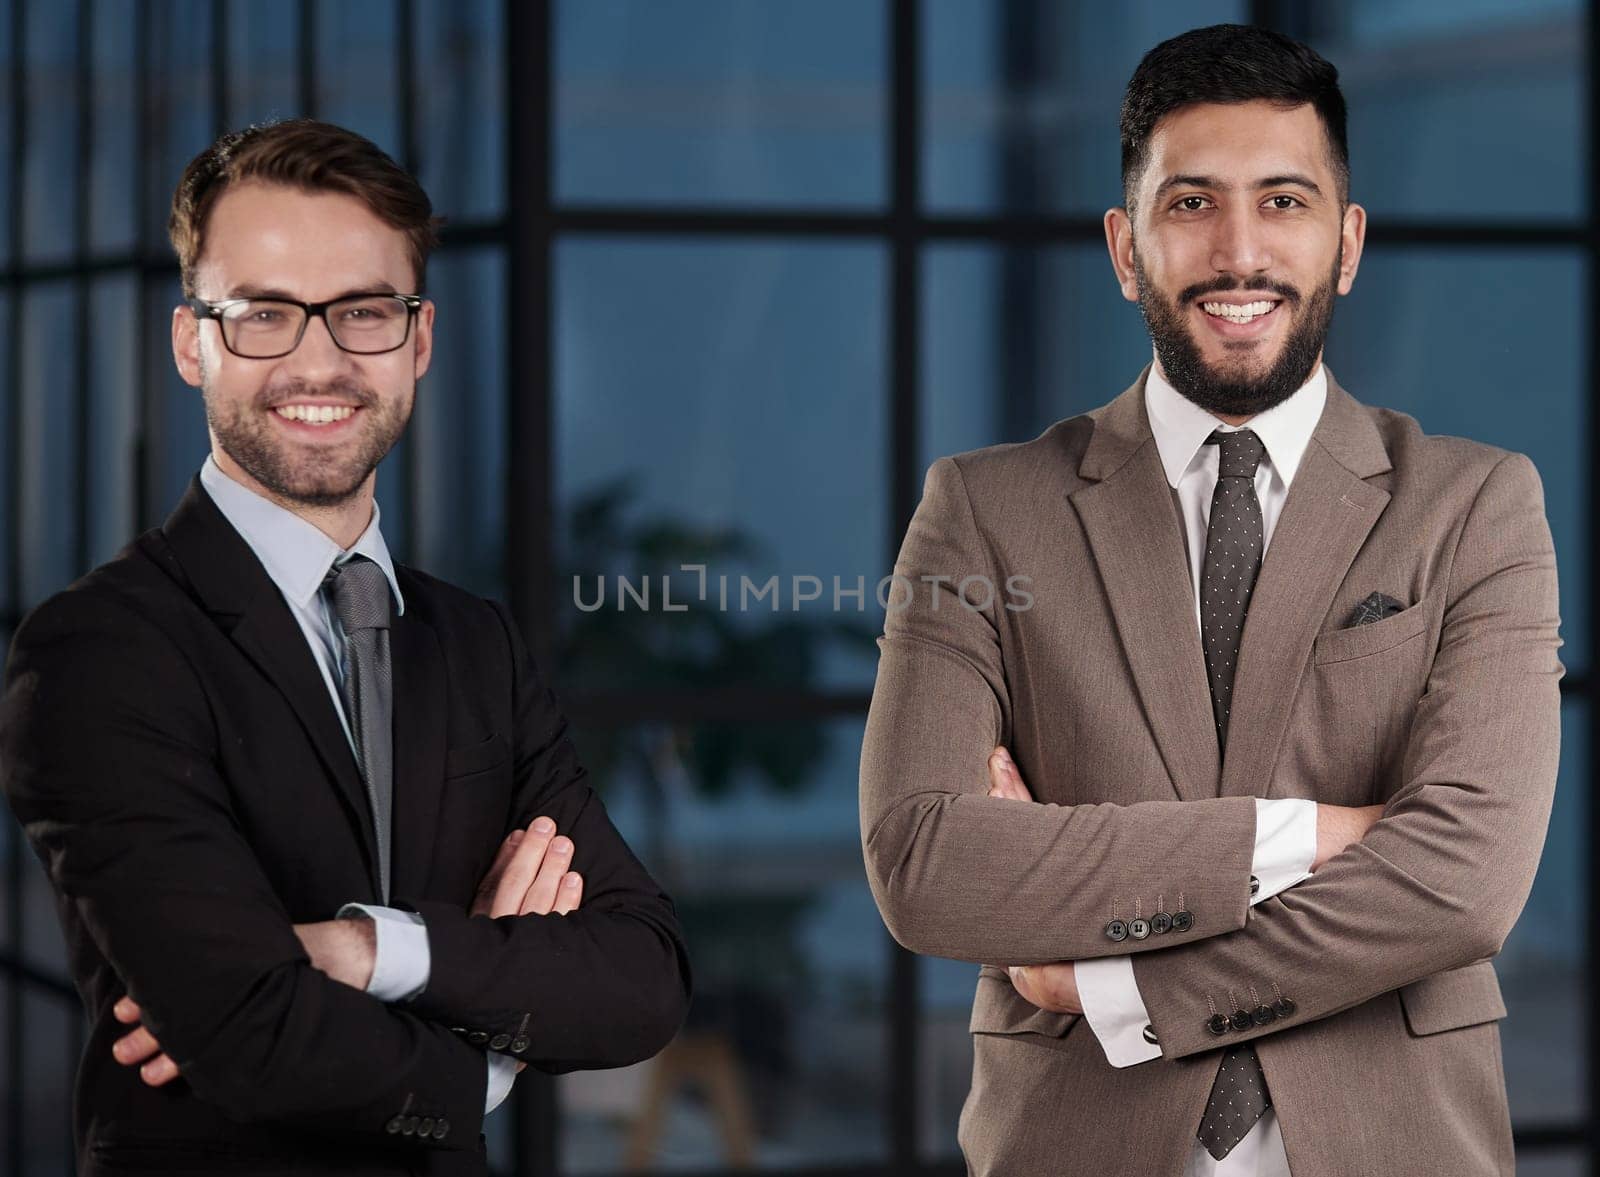 Portrait of two businesspeople standing together with their arms crossed in an office.